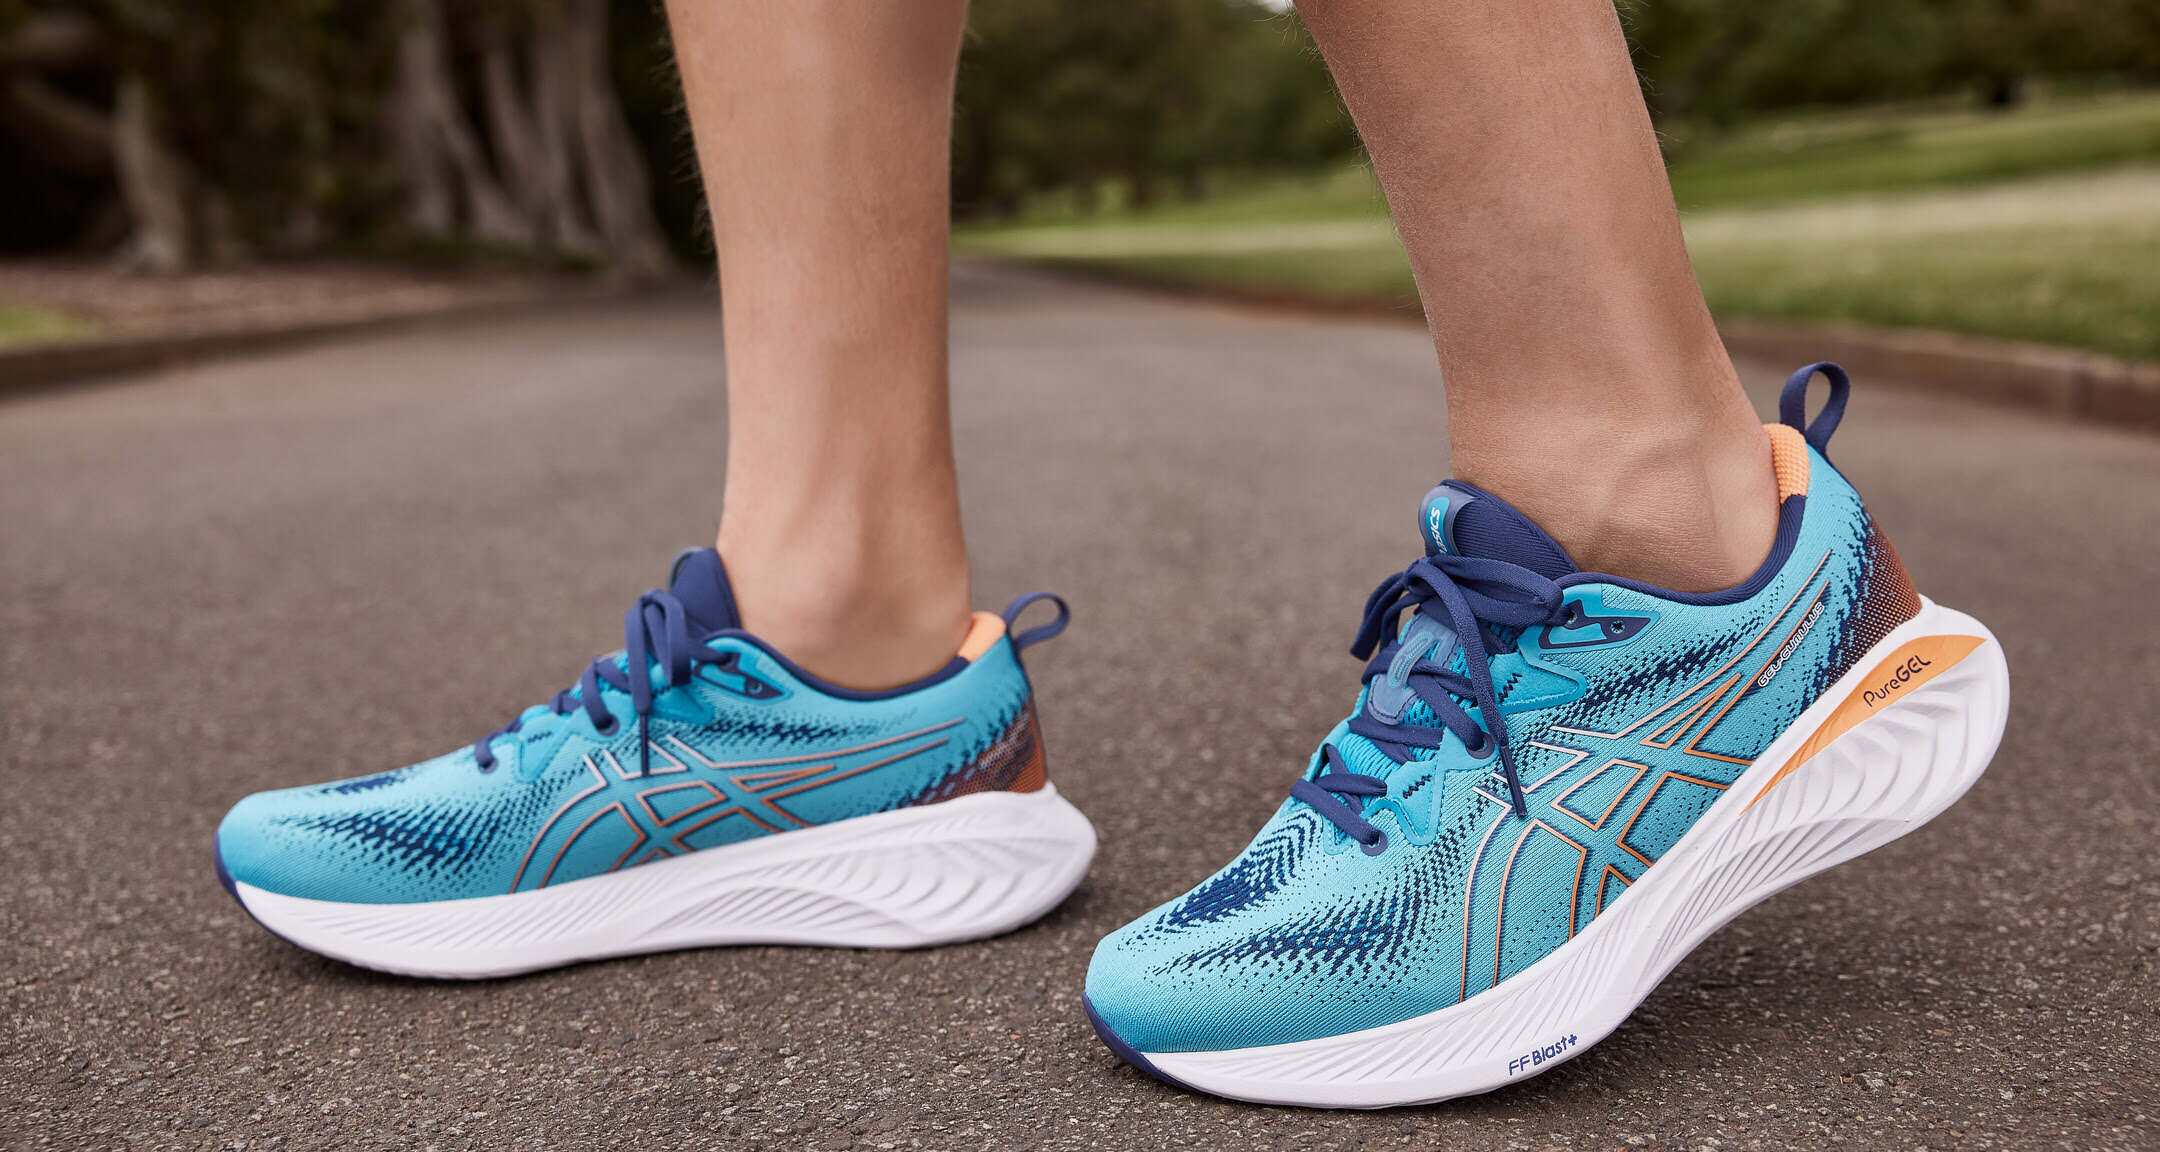 Best Running Shoes for Bunions 2021 - Top 6 for Men and Women